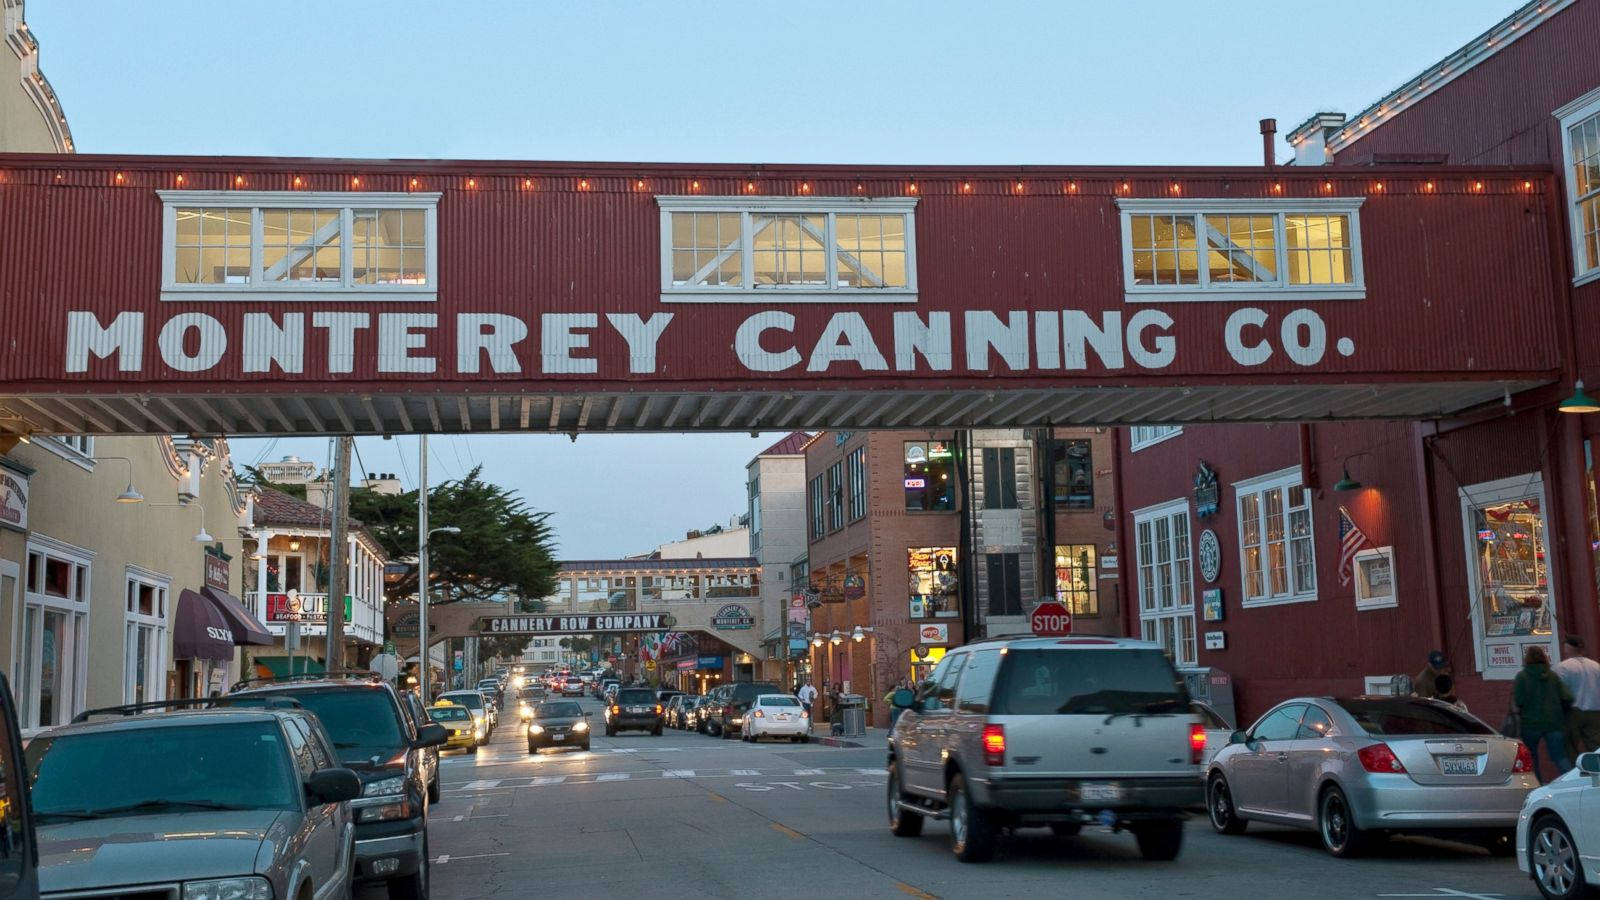 Monterey Canning i Cannery Row. Wallpaper